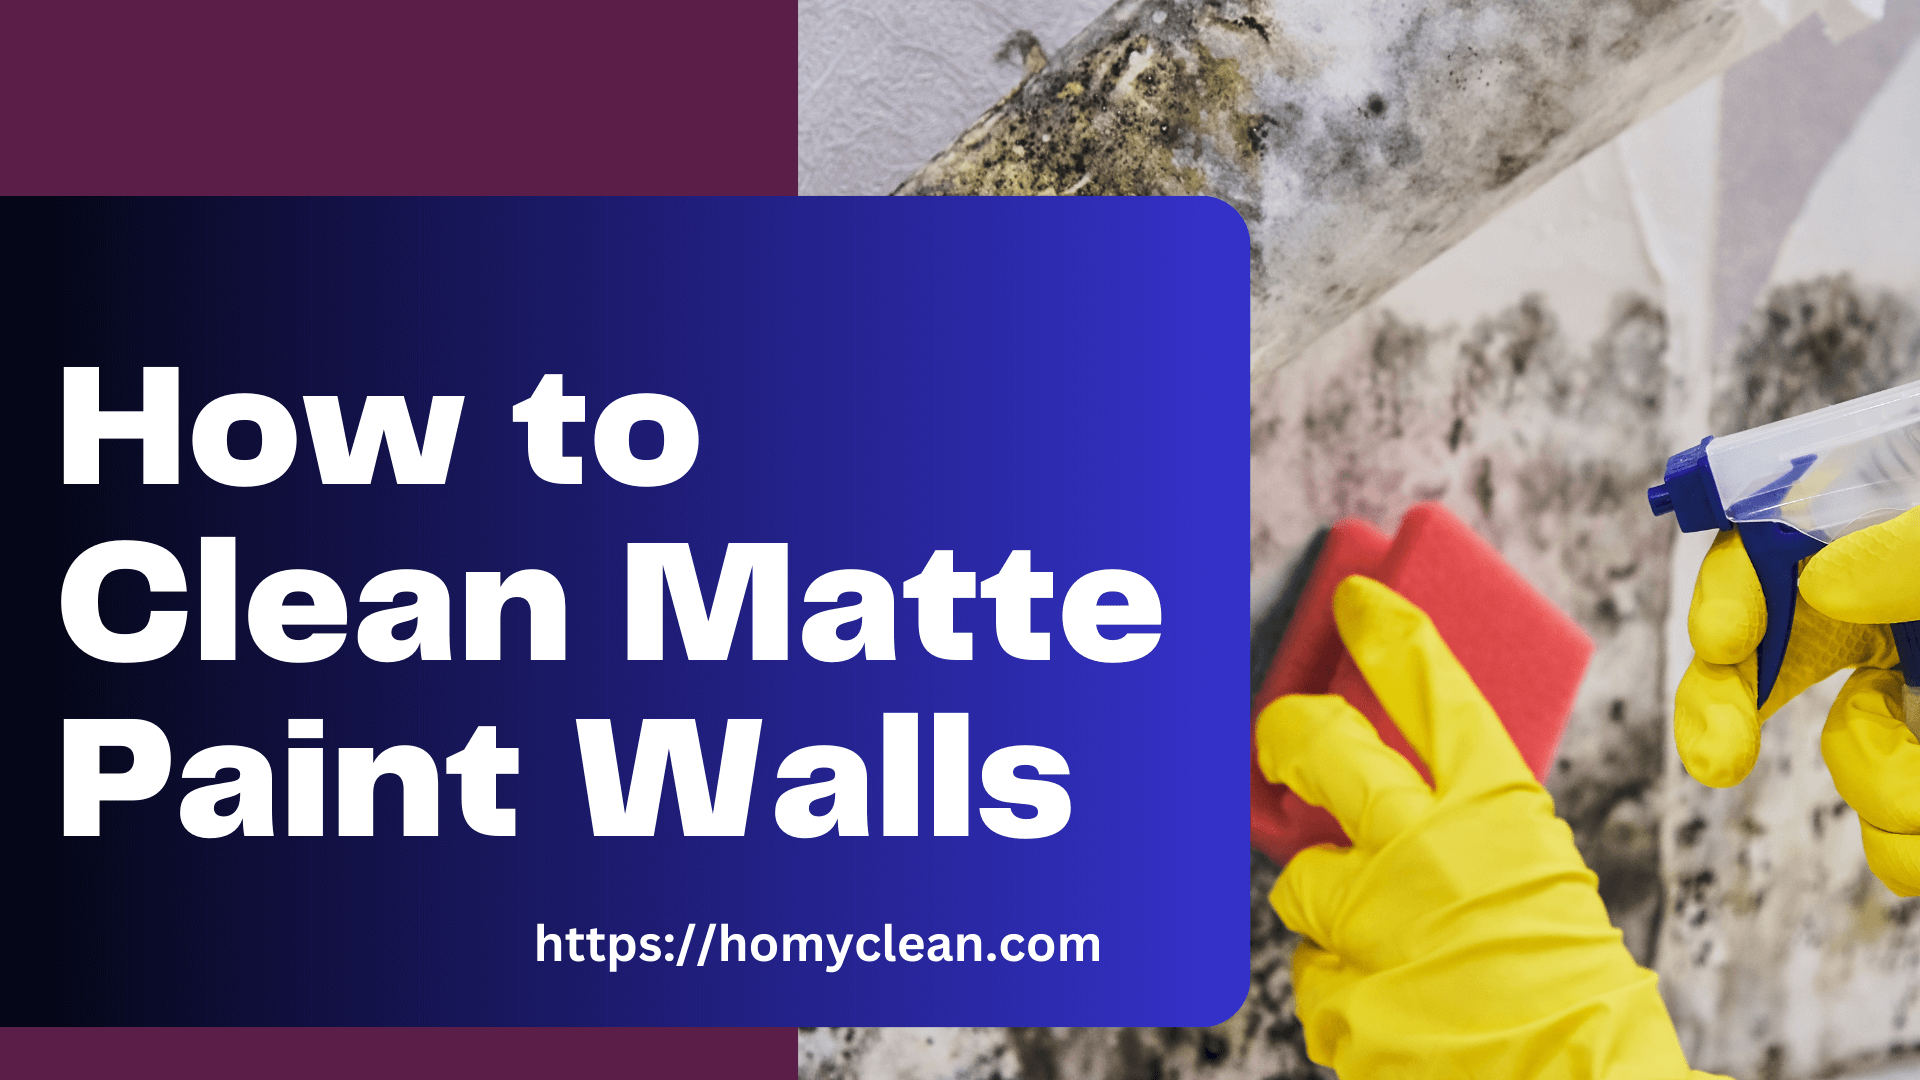 How to Clean Matte Paint Walls – Ans by Expert